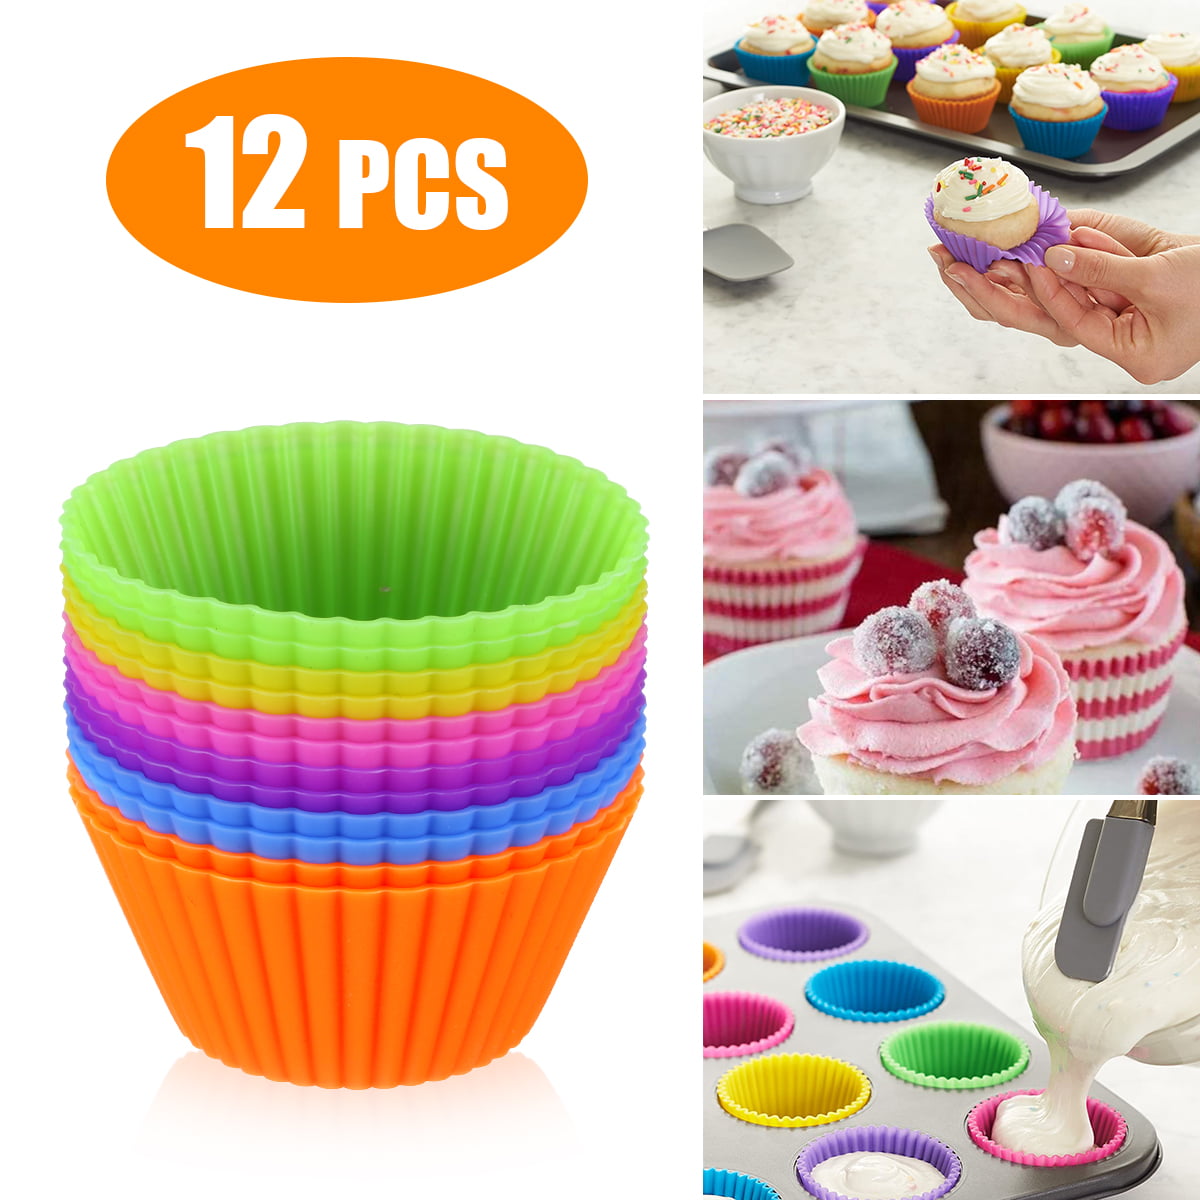 12 Nonstick Silicone Star Shape Cupcake Mold Cake Liners Baking Cups 1 Dozen